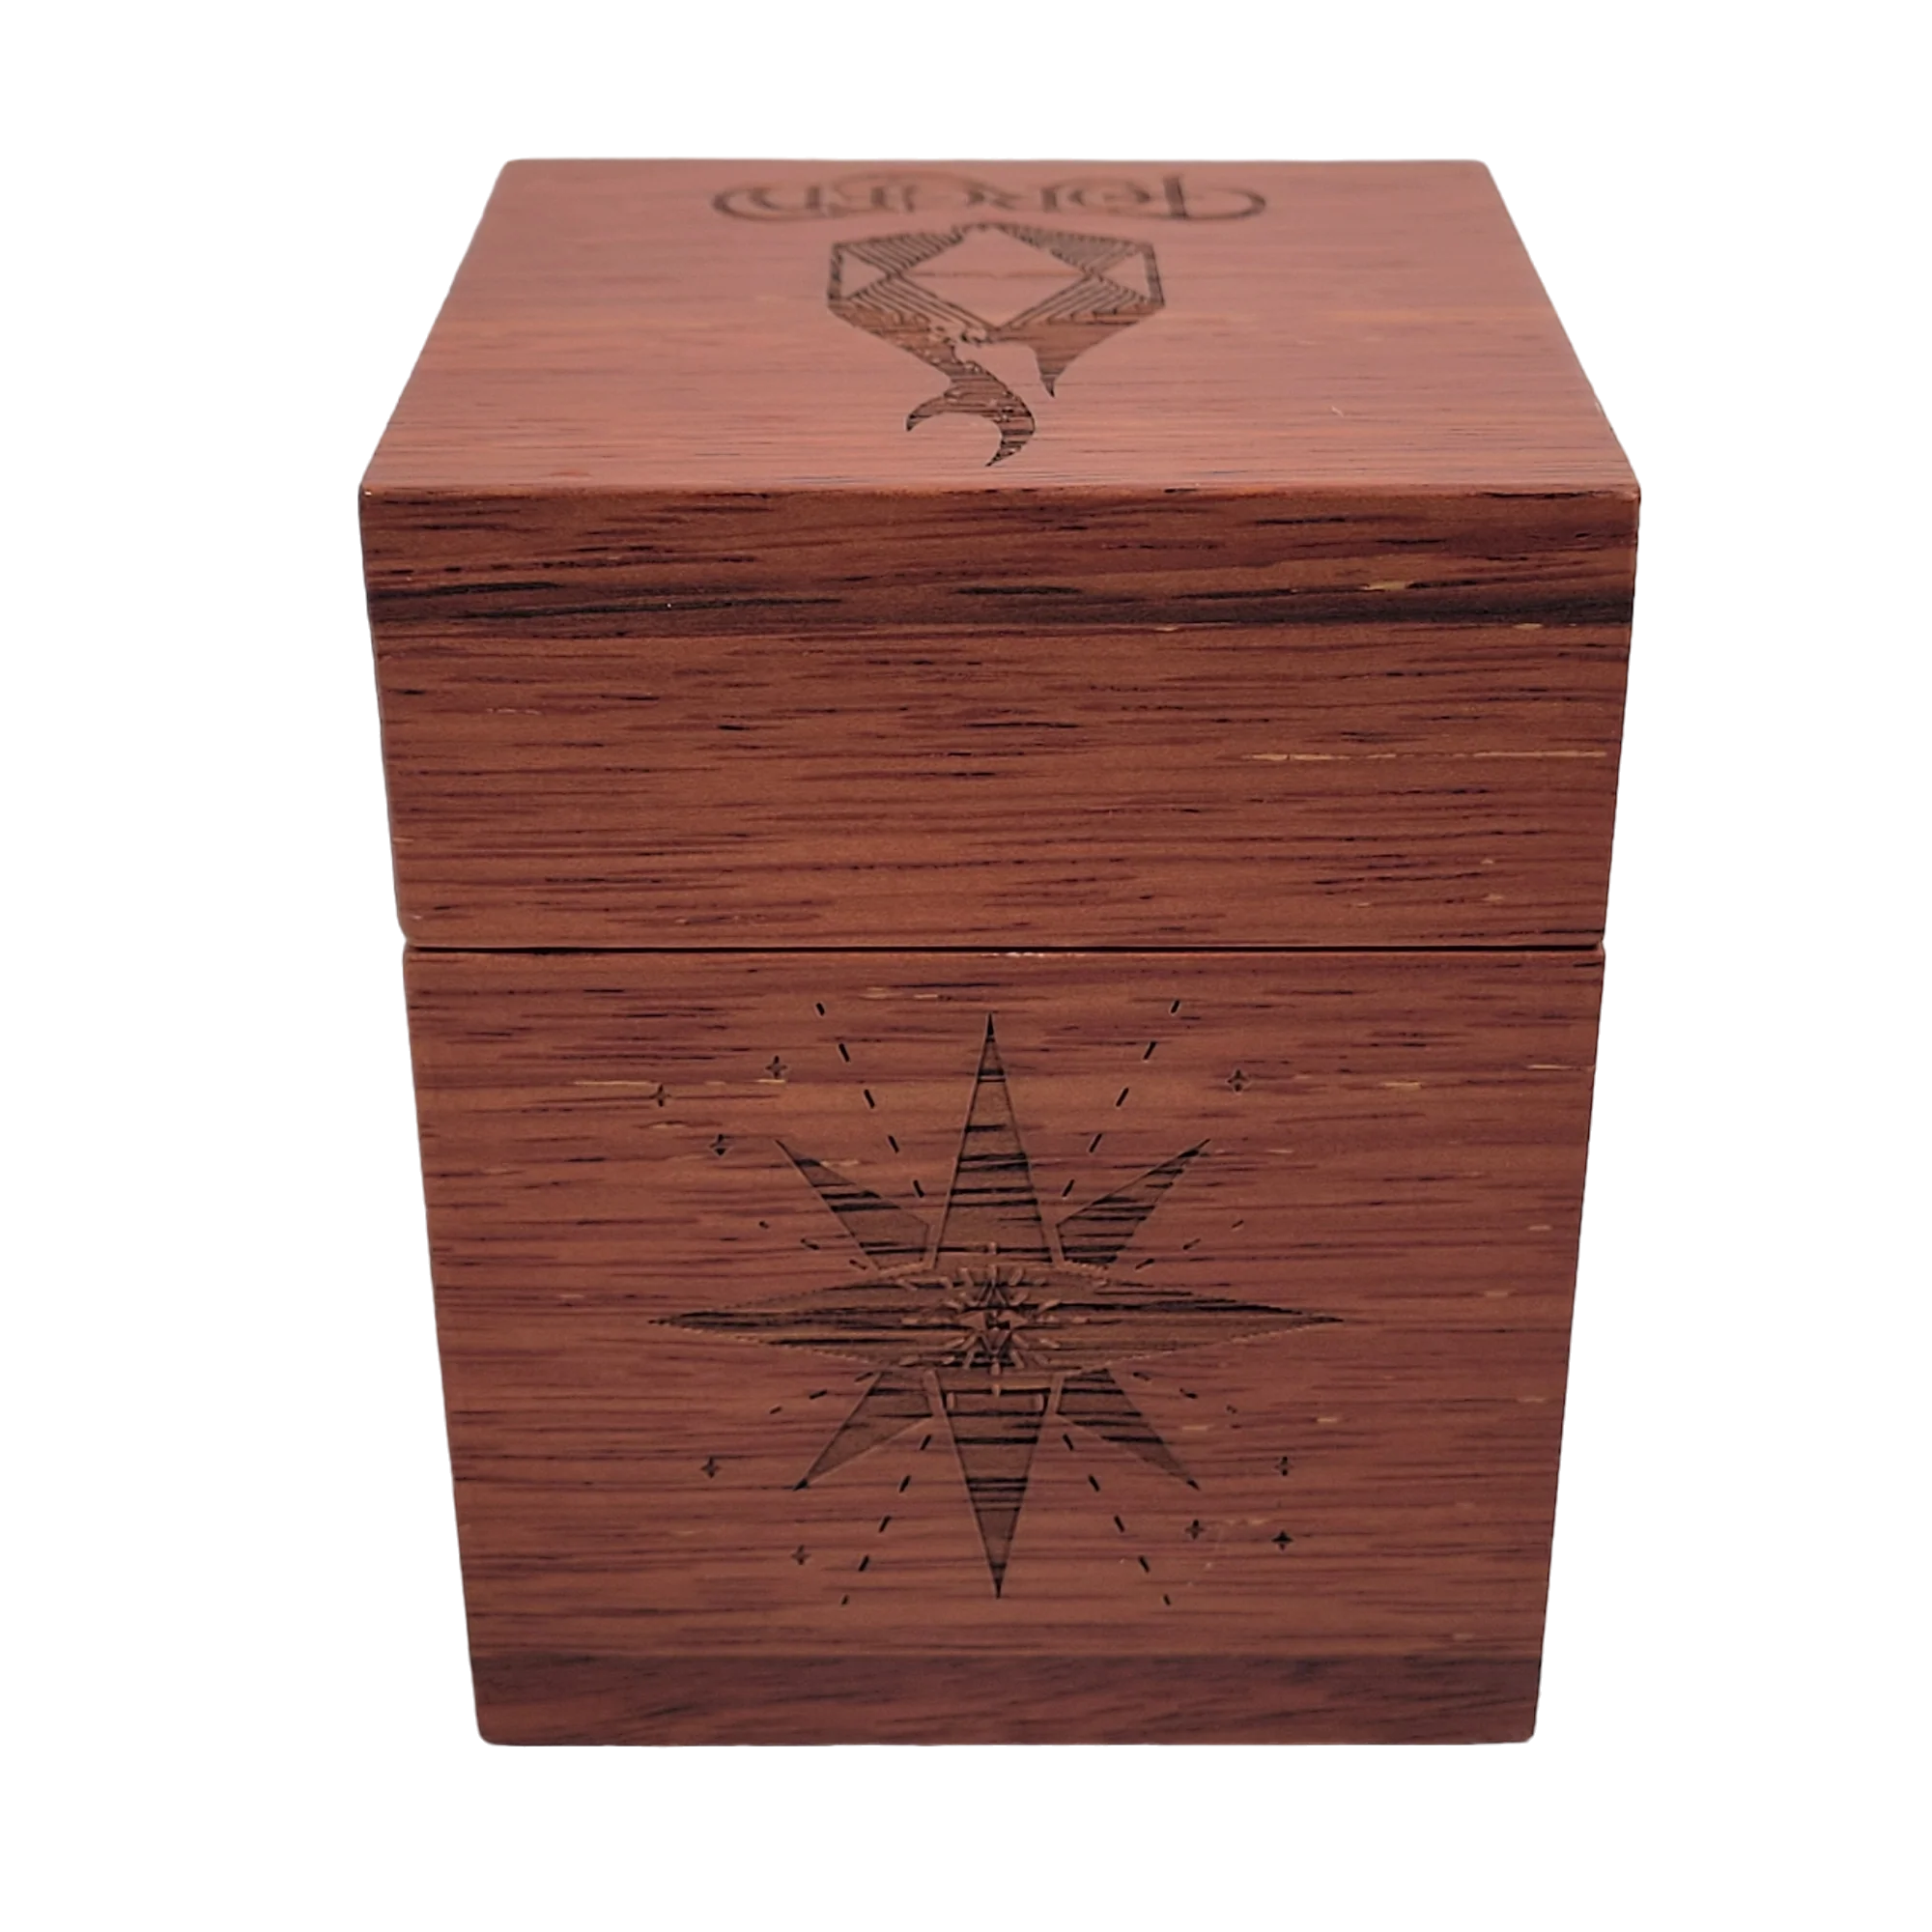 Forged Etched Wooden Storage Box with Magnetic Lid | Gamers Paradise